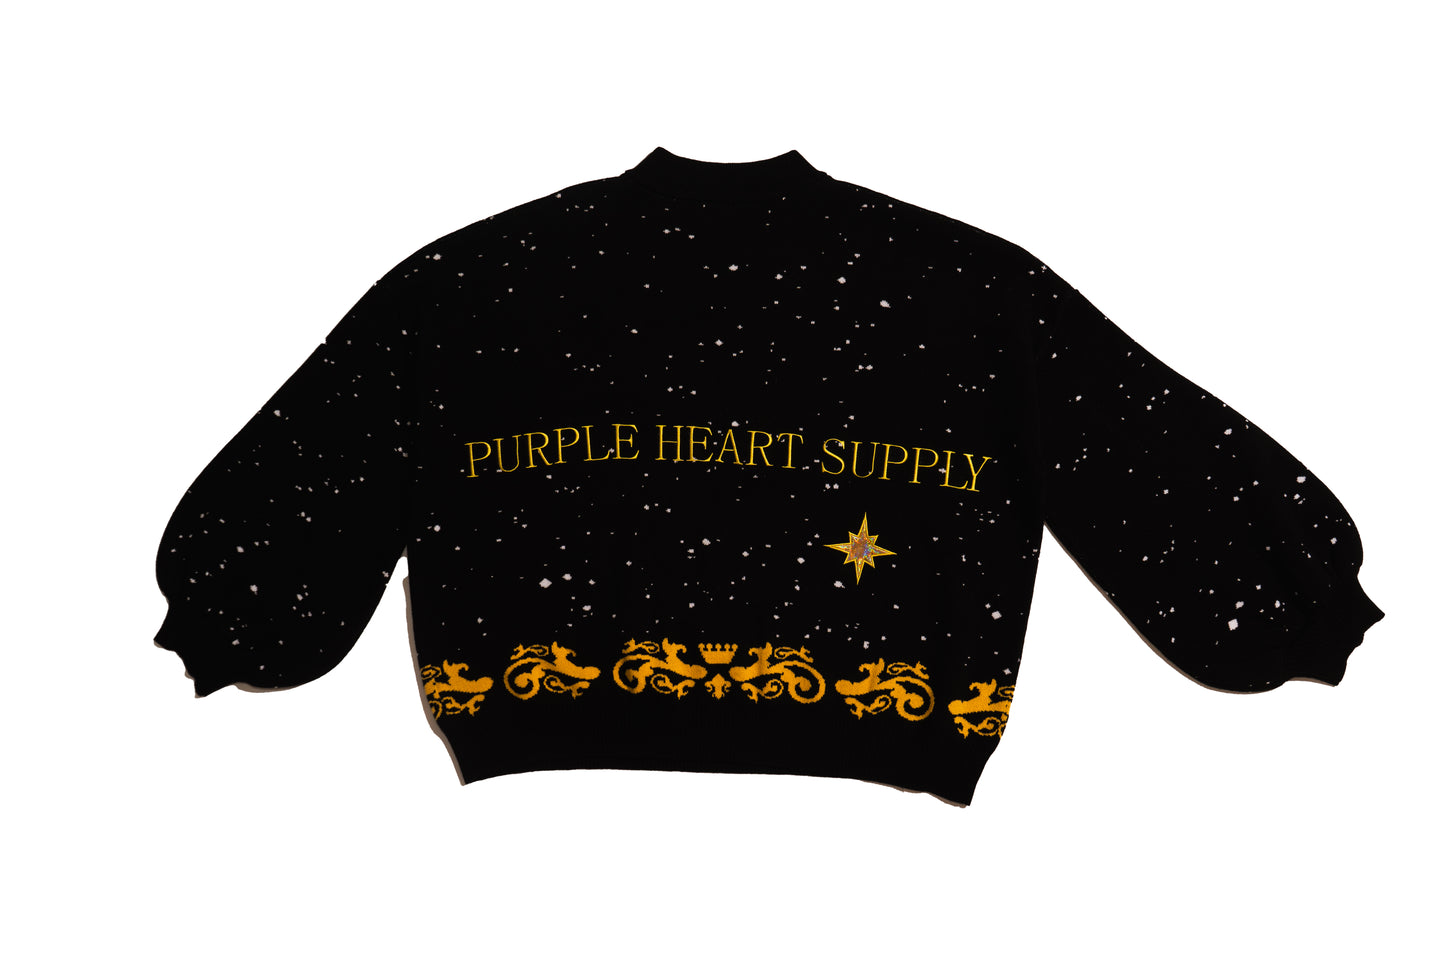 The PHS Sweater